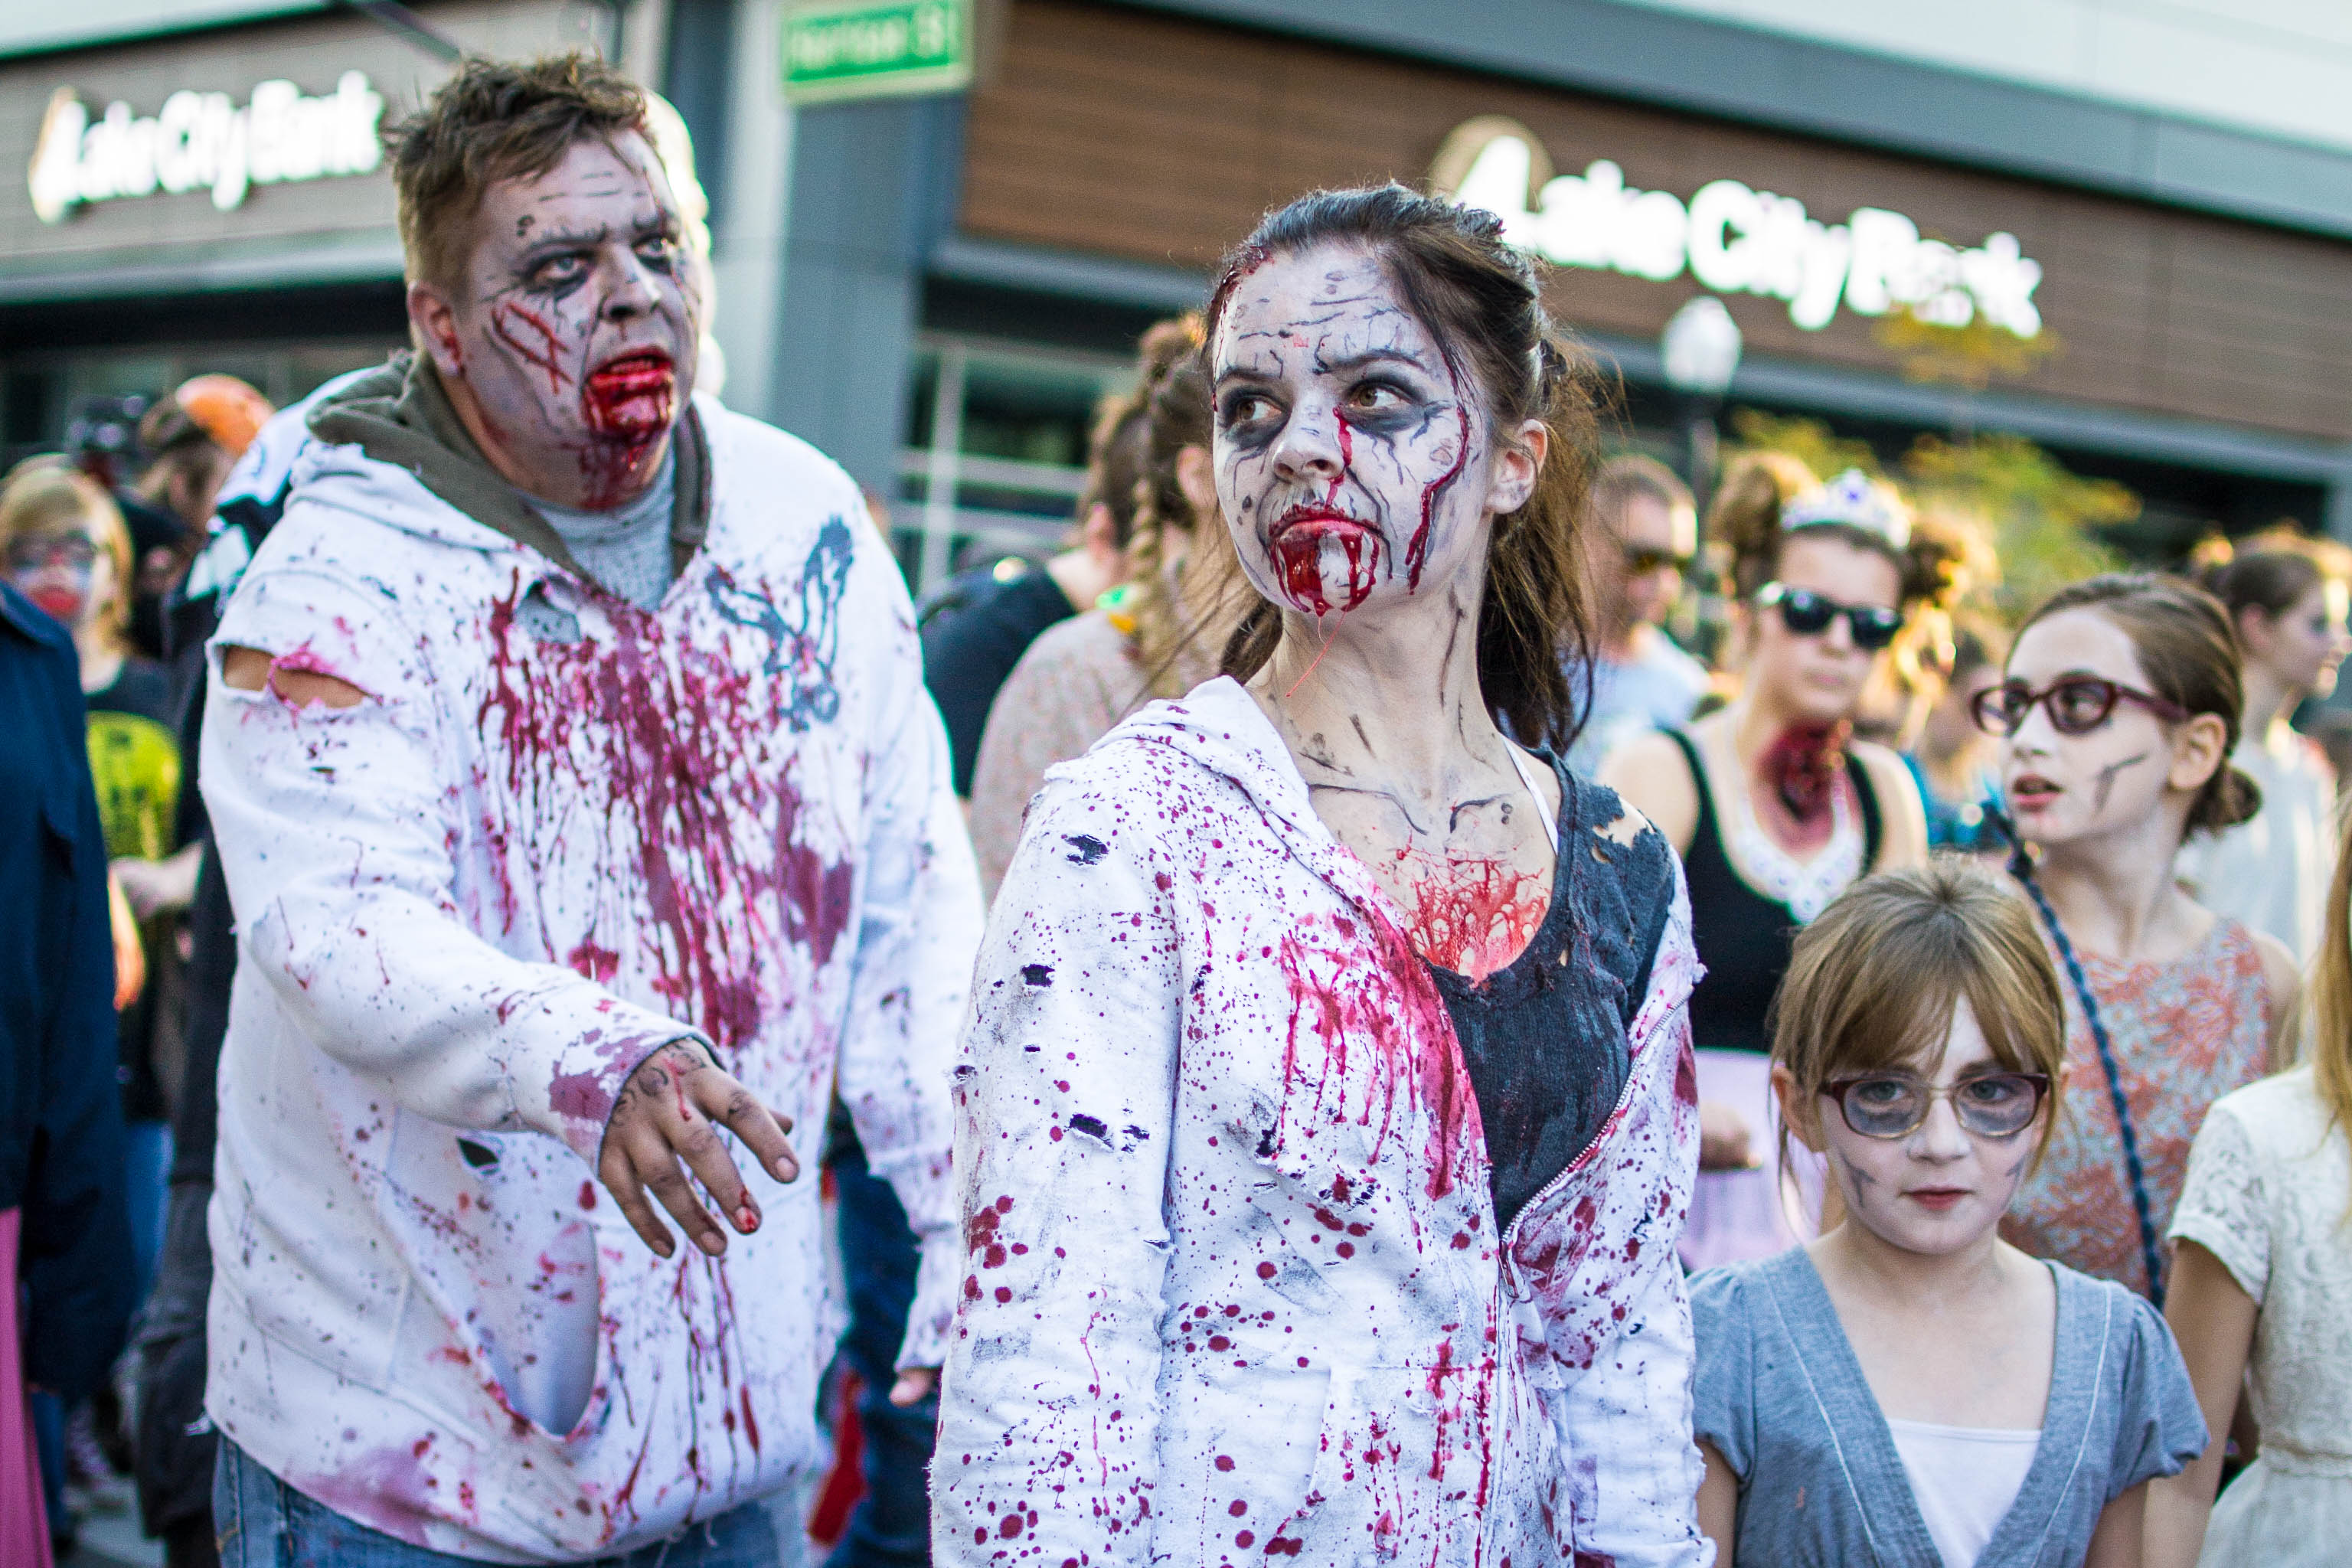 Creepy creatures walking the streets during the annual Zombie Walk